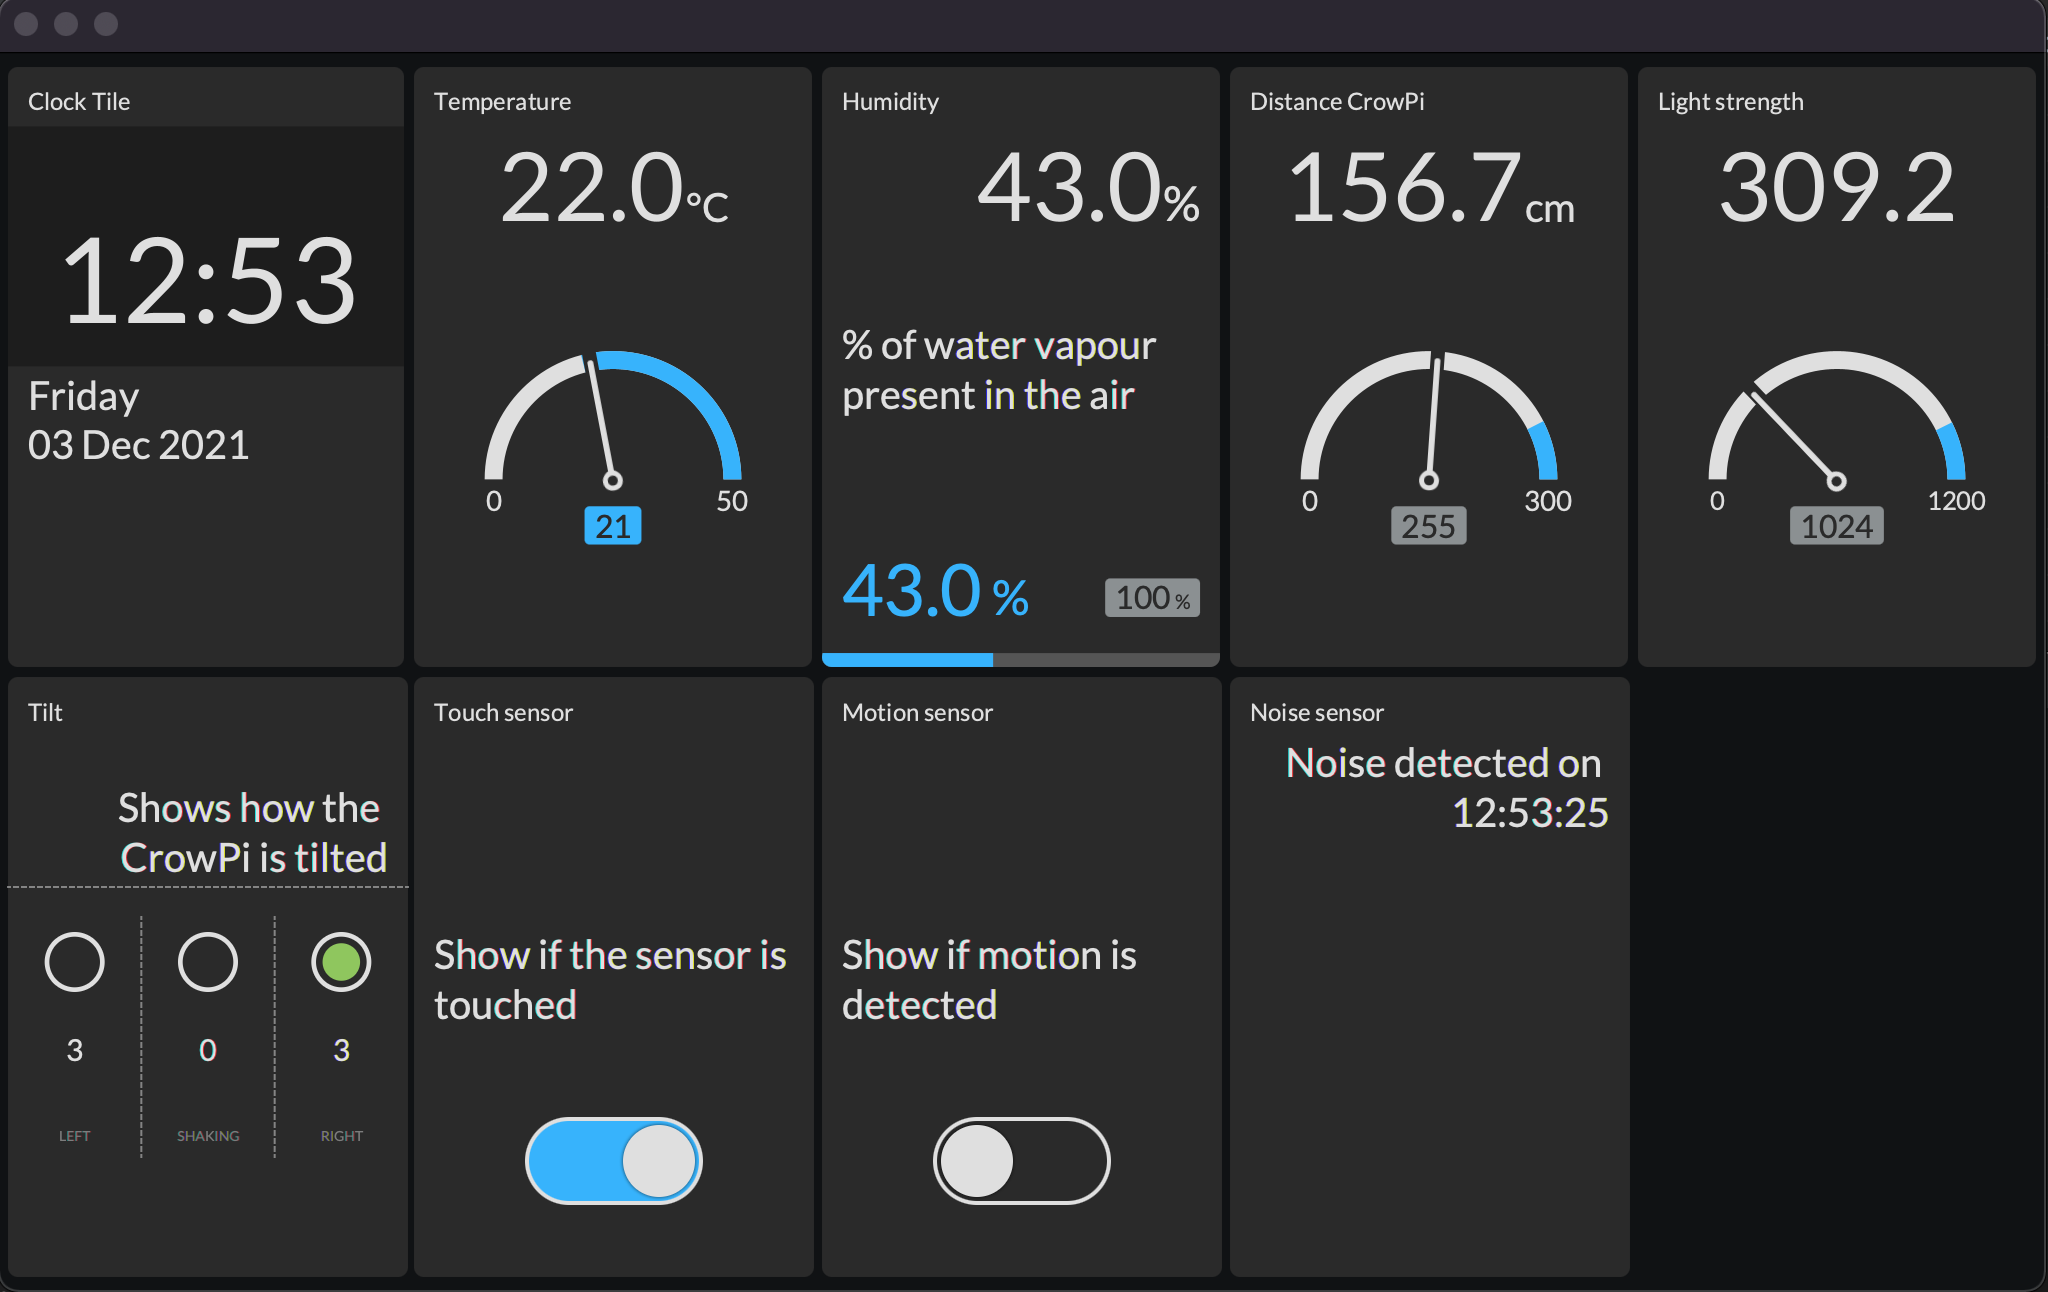 Dashboard application showing the data received from the CrowPi sensors